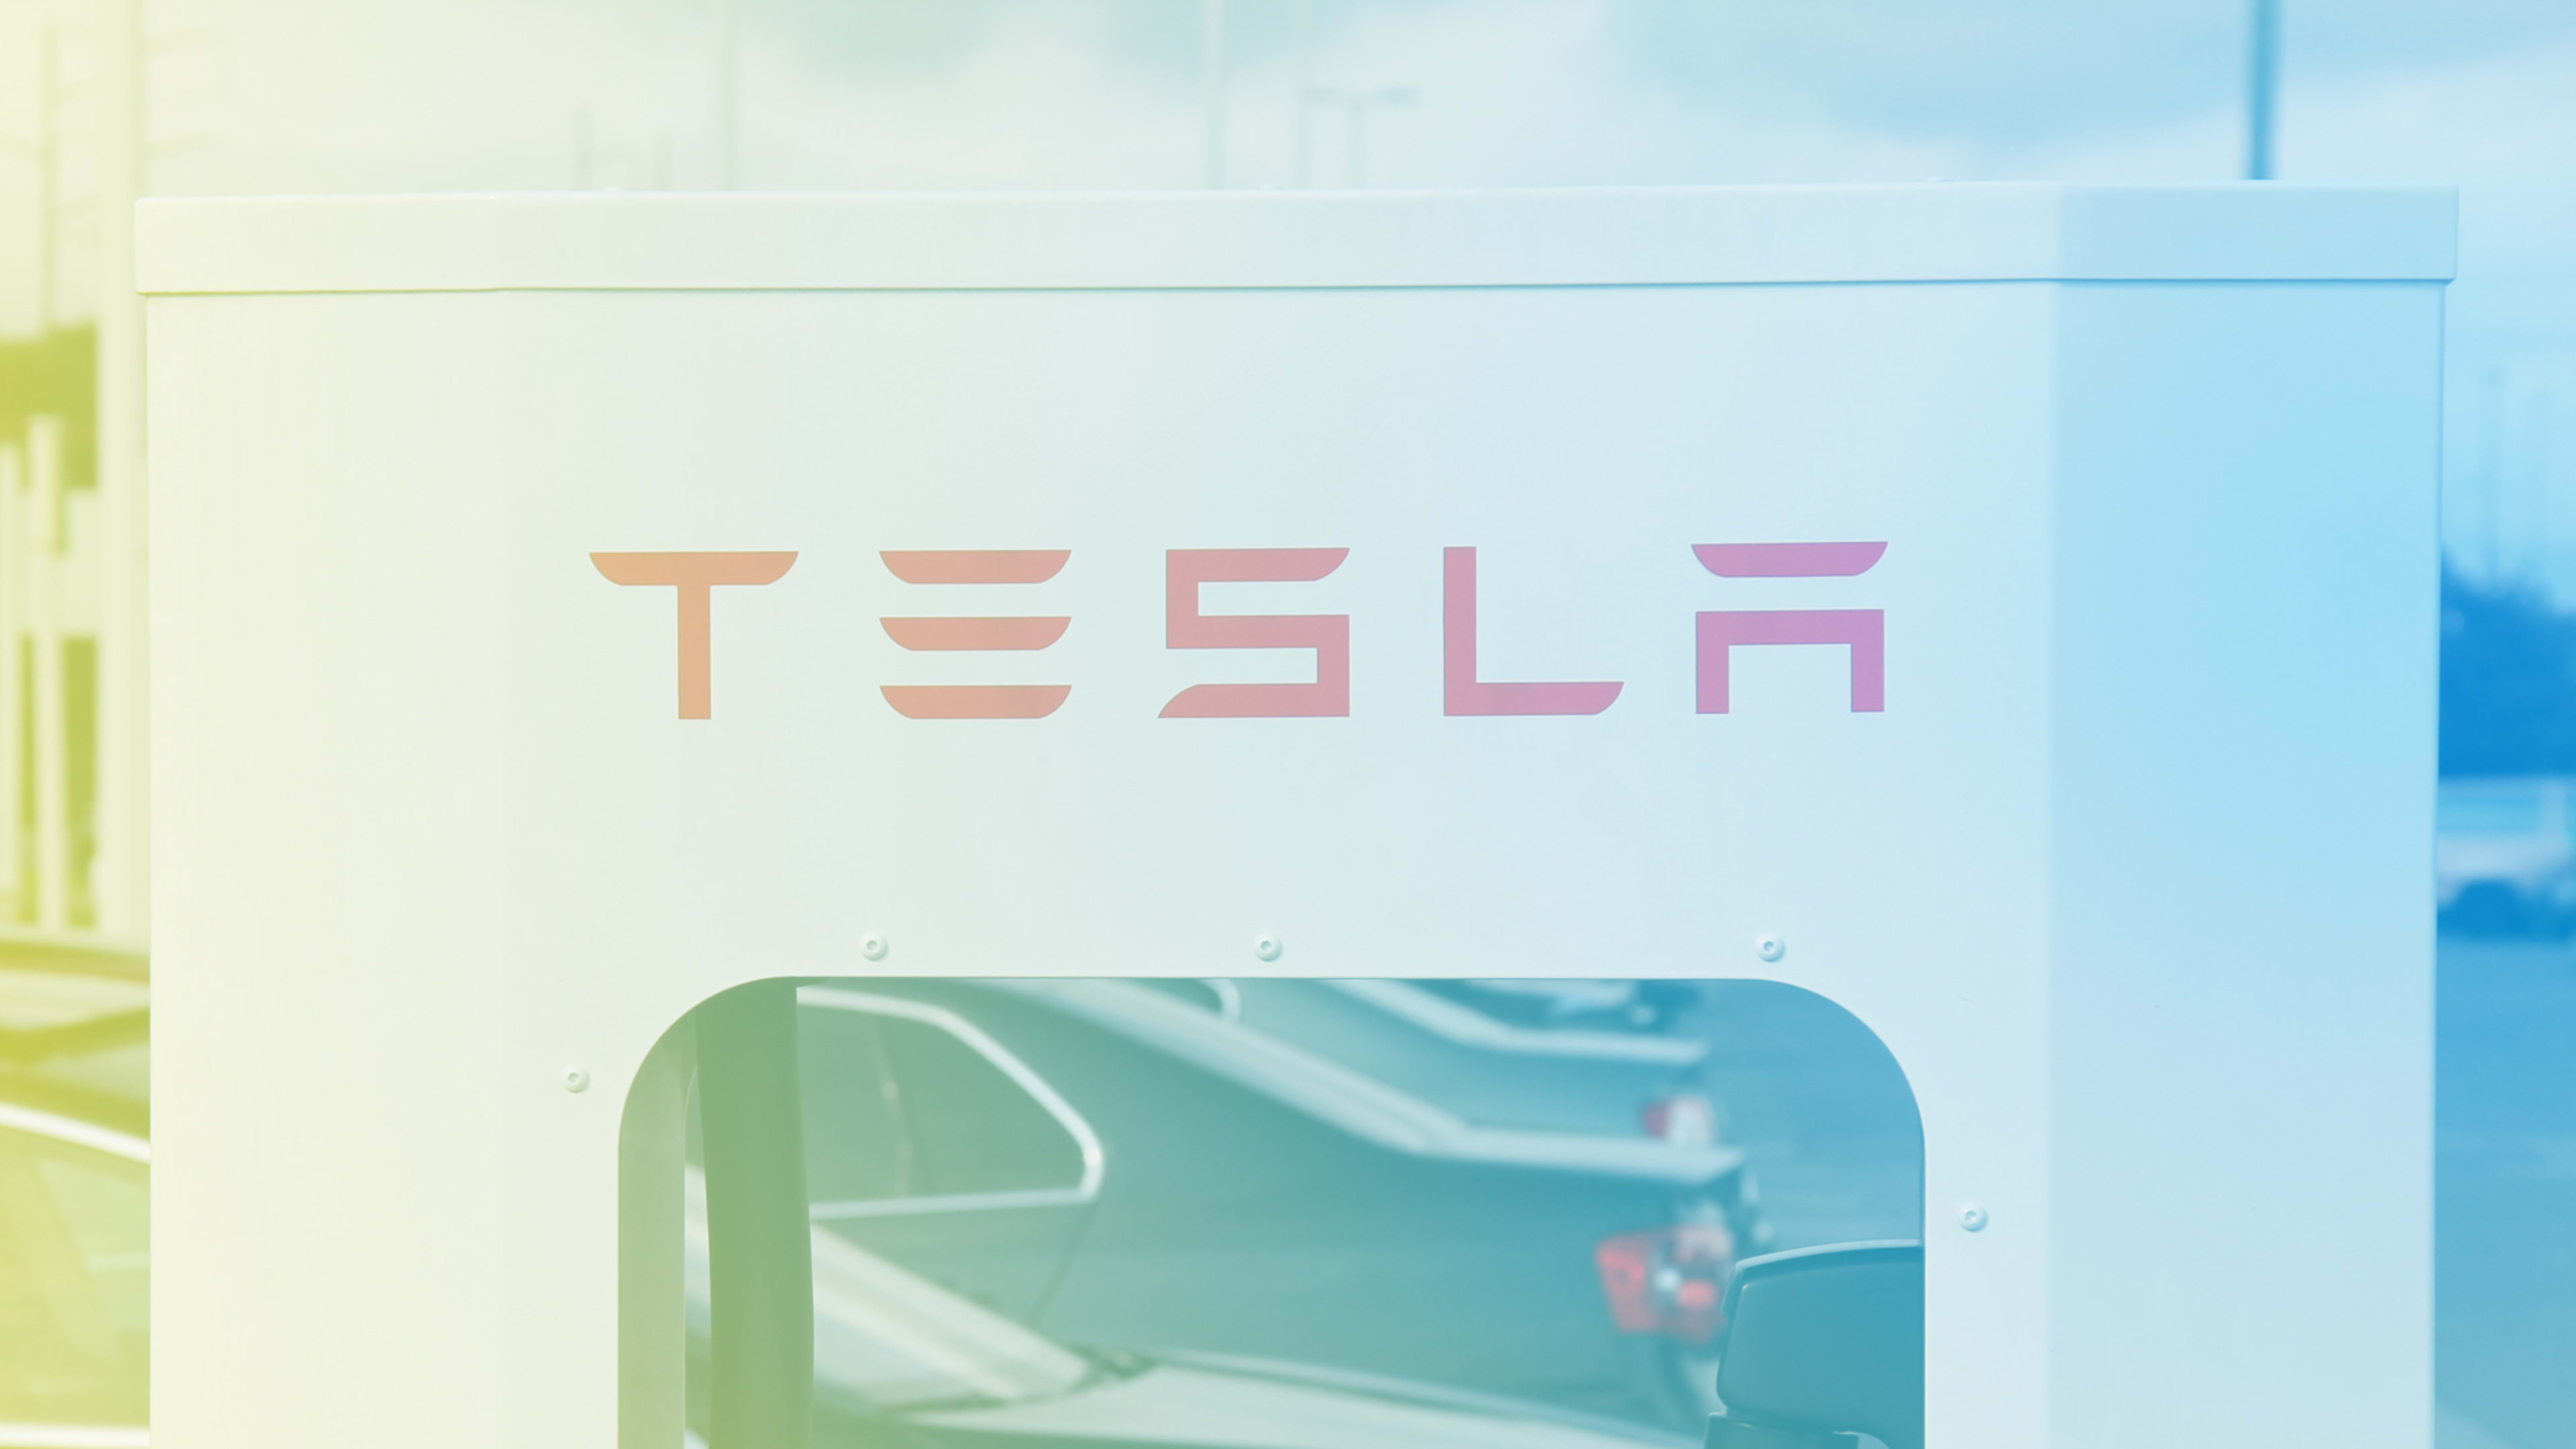 Tesla is suing a former employee for leaking confidential data